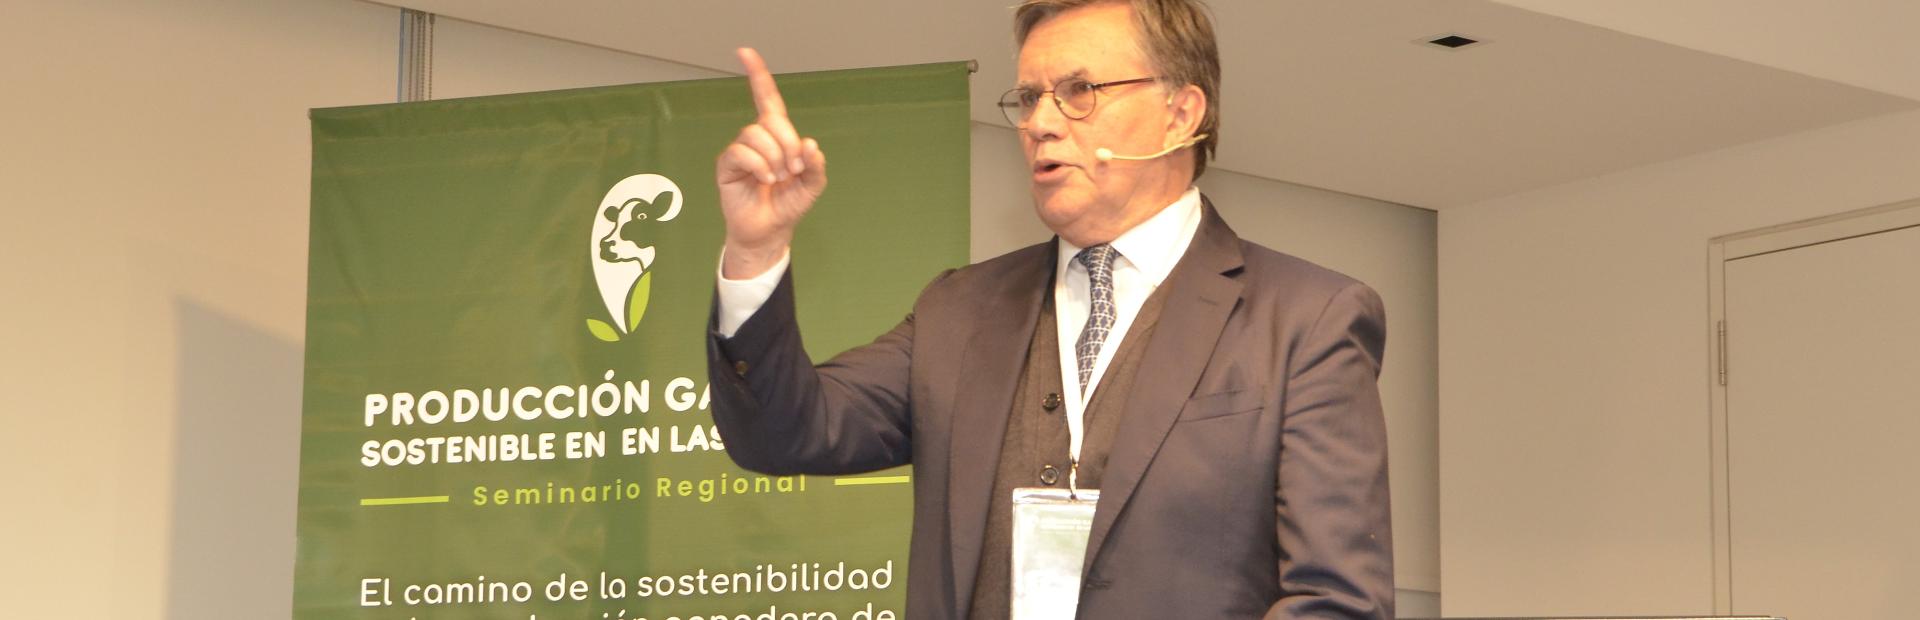 IICA Director General Manuel Otero participated in the regional seminar “The Road to Sustainability in Livestock Farming in the Americas”, held in Buenos Aires, Argentina.